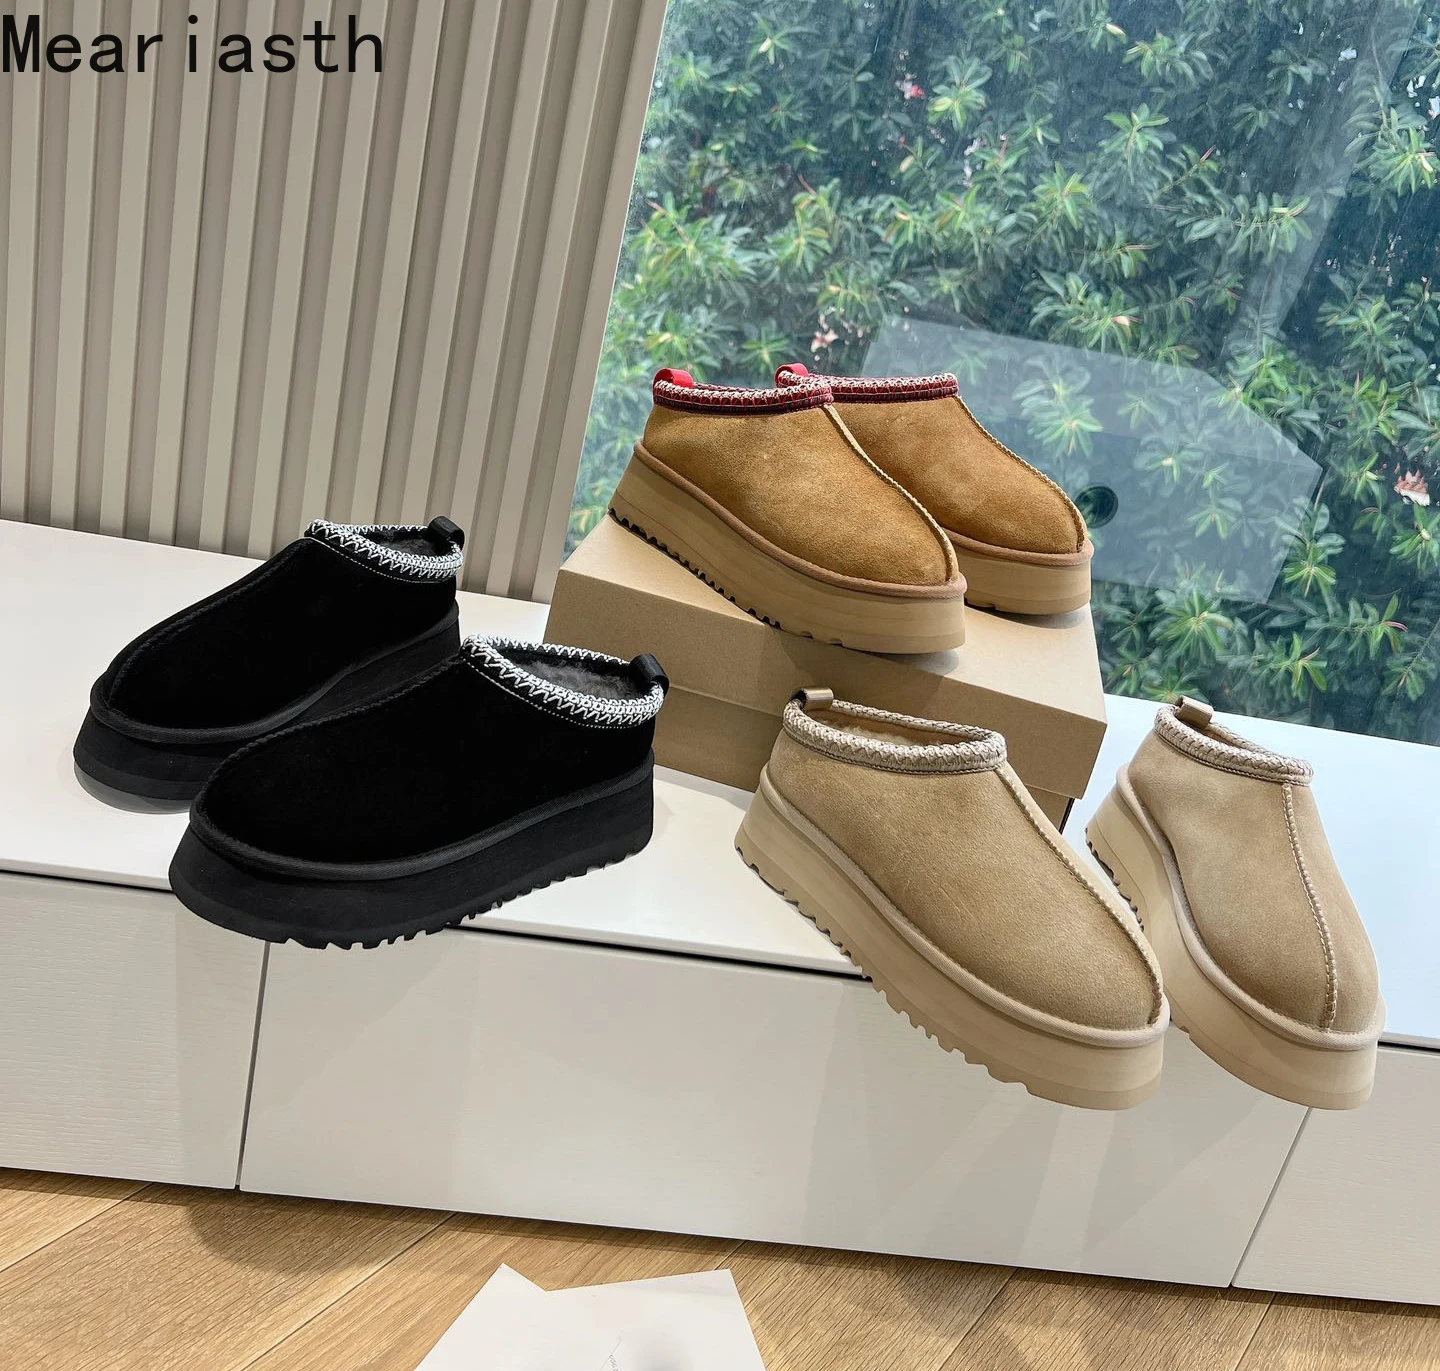 

Australia Color Snow boots Sheepskin Shearling Tazz Mules Women Men Ultra Mini Boot Slip-on Shoes Suede Upper Fall Winter boots